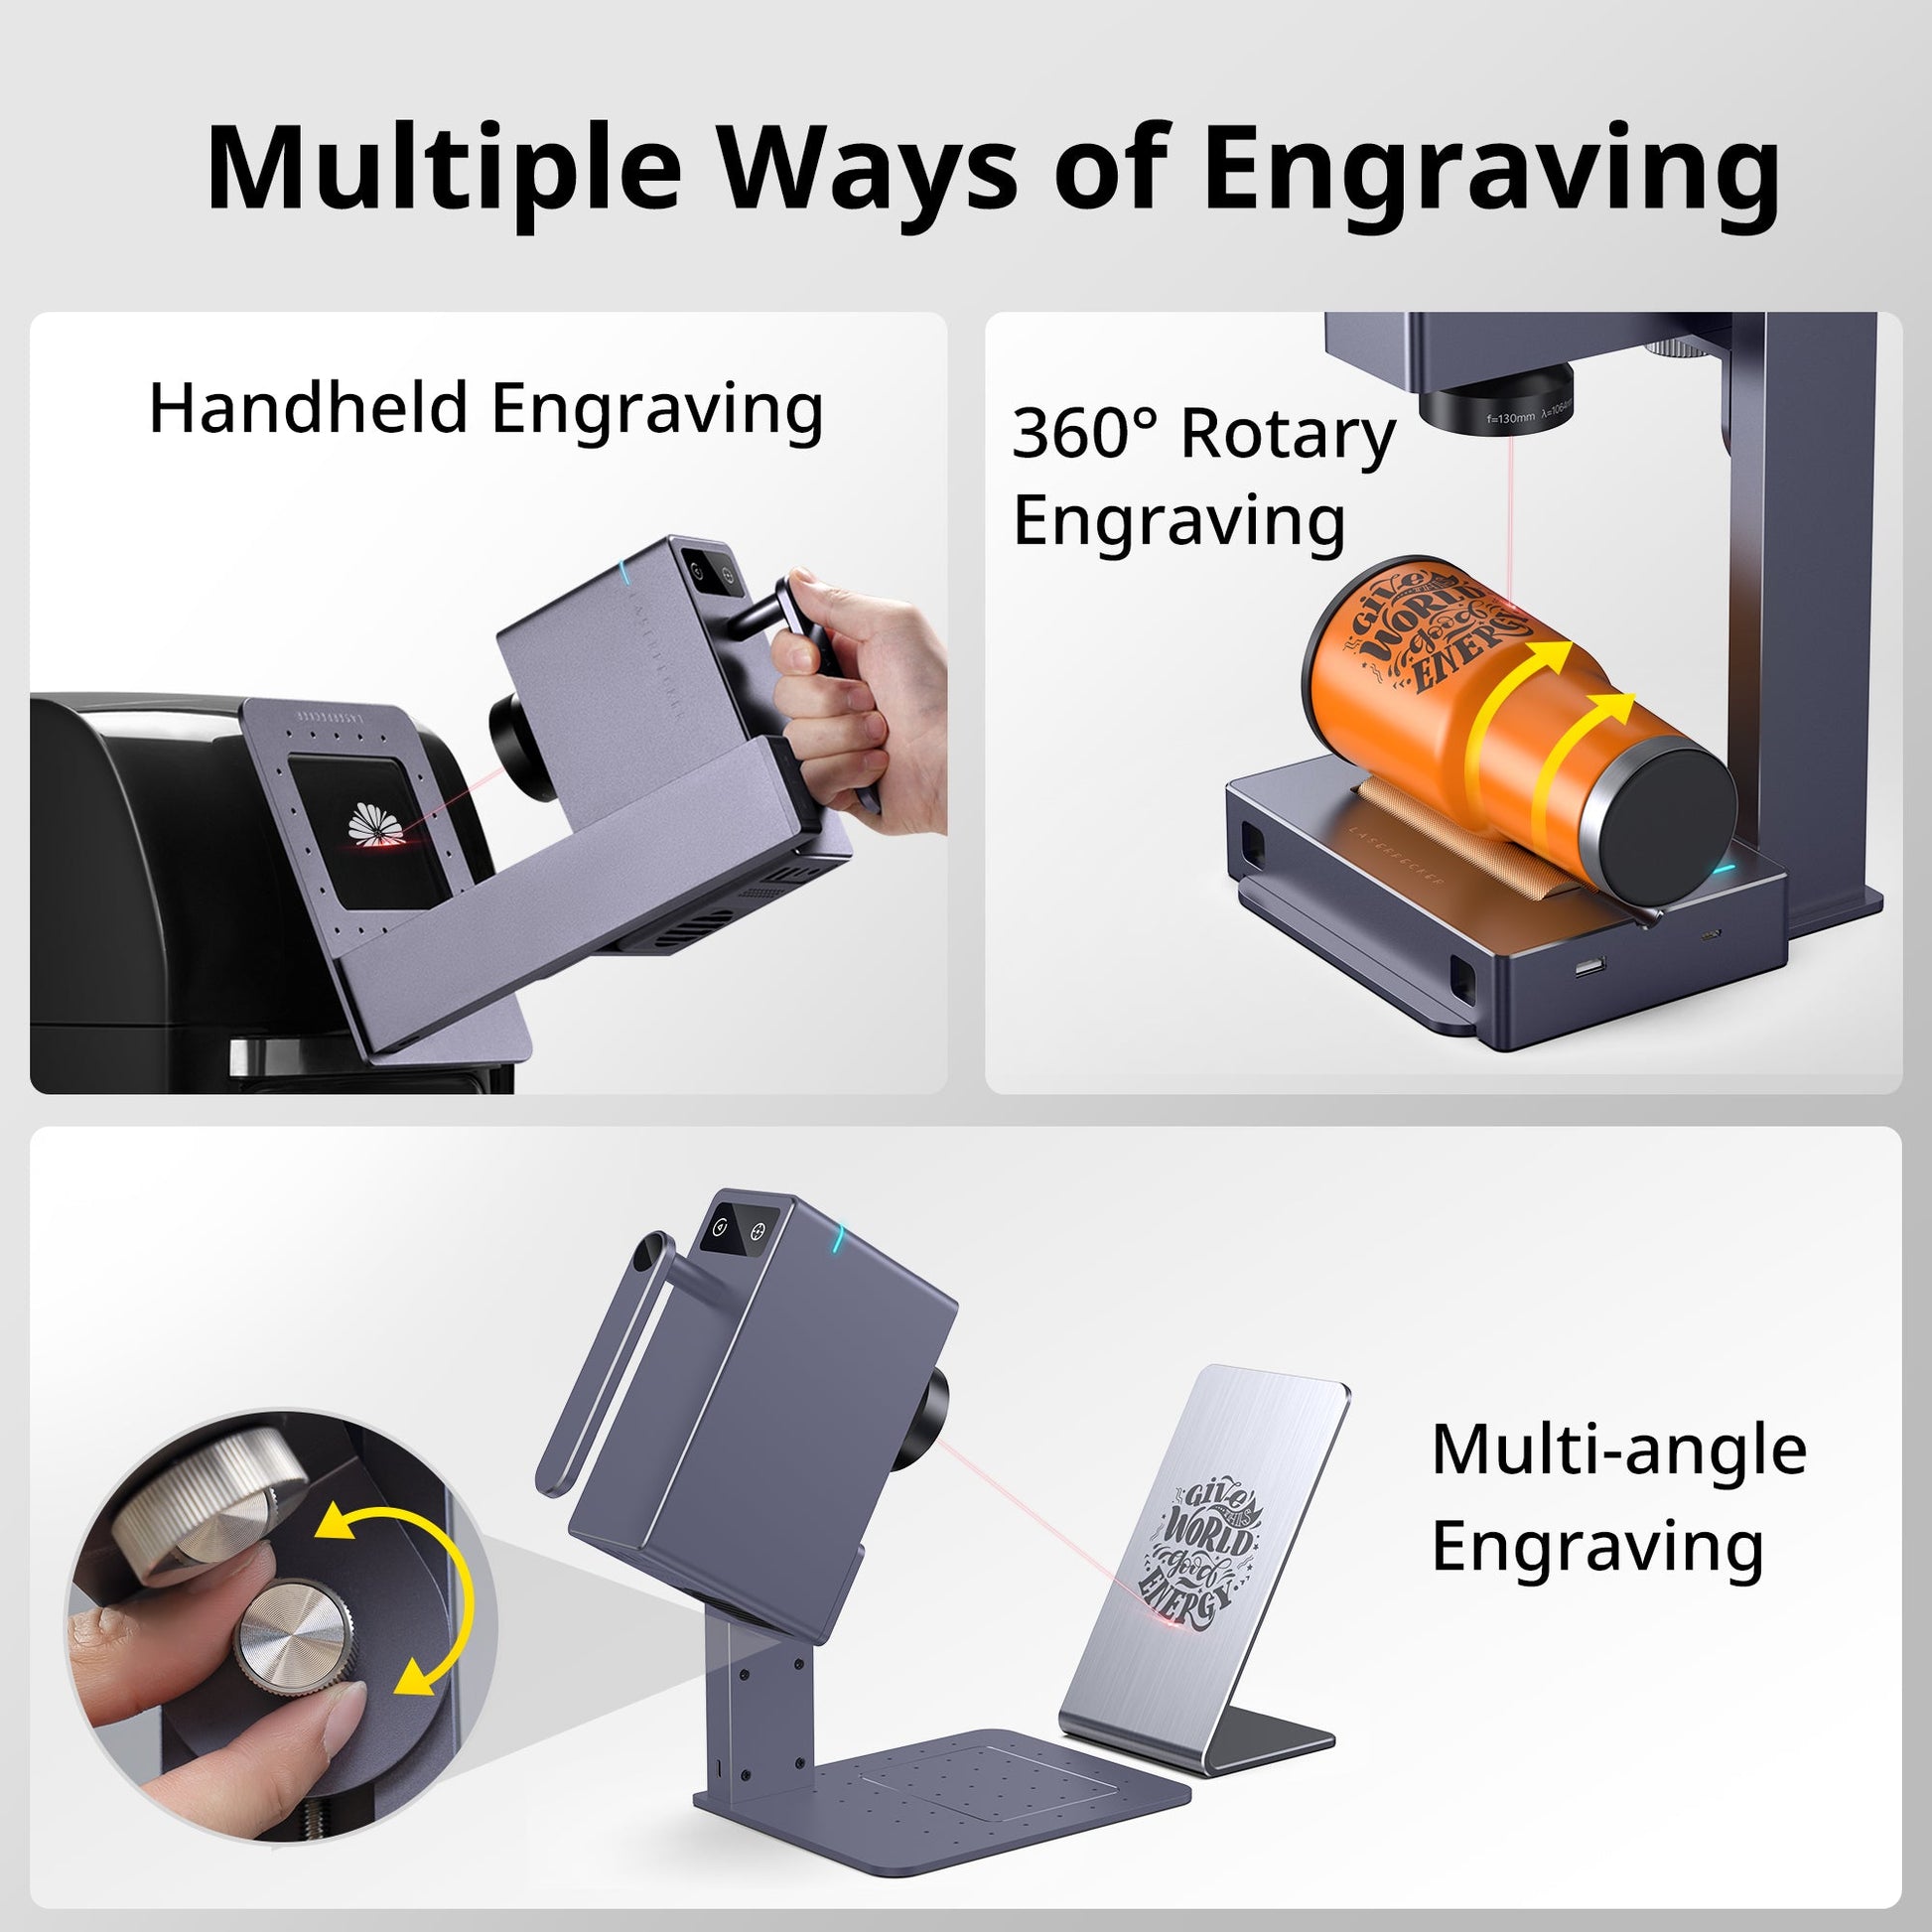 Creative engraving modes with LP3: handheld, rotary and multi-angle engraving